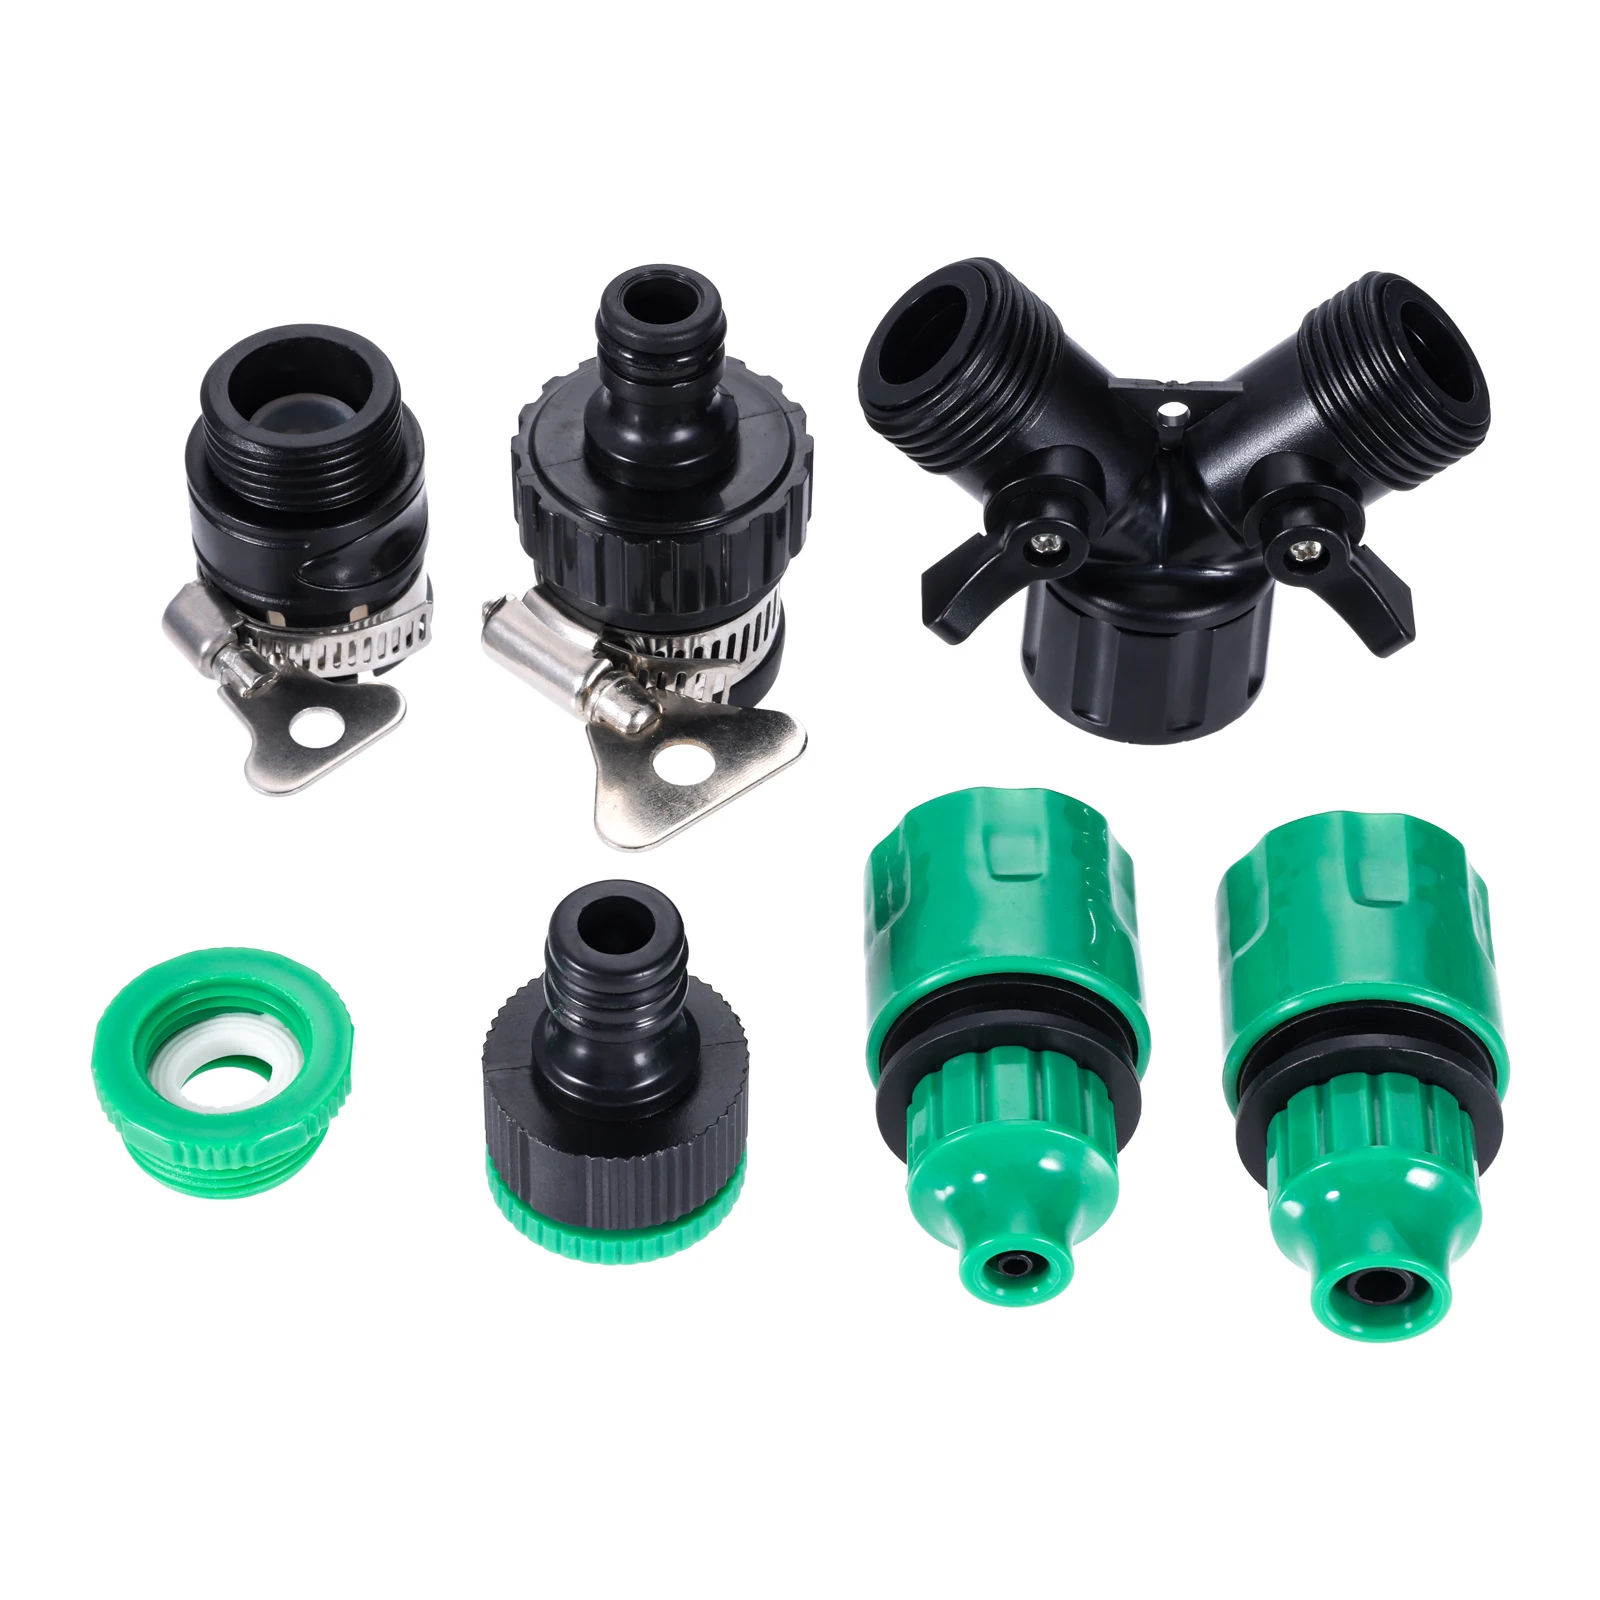 

7pcs/set Hose Joint Faucet Connector Sprinkler Nozzle Connector Faucet Water Tap Adapter For Lawn Washing Machine Kitchen Faucet